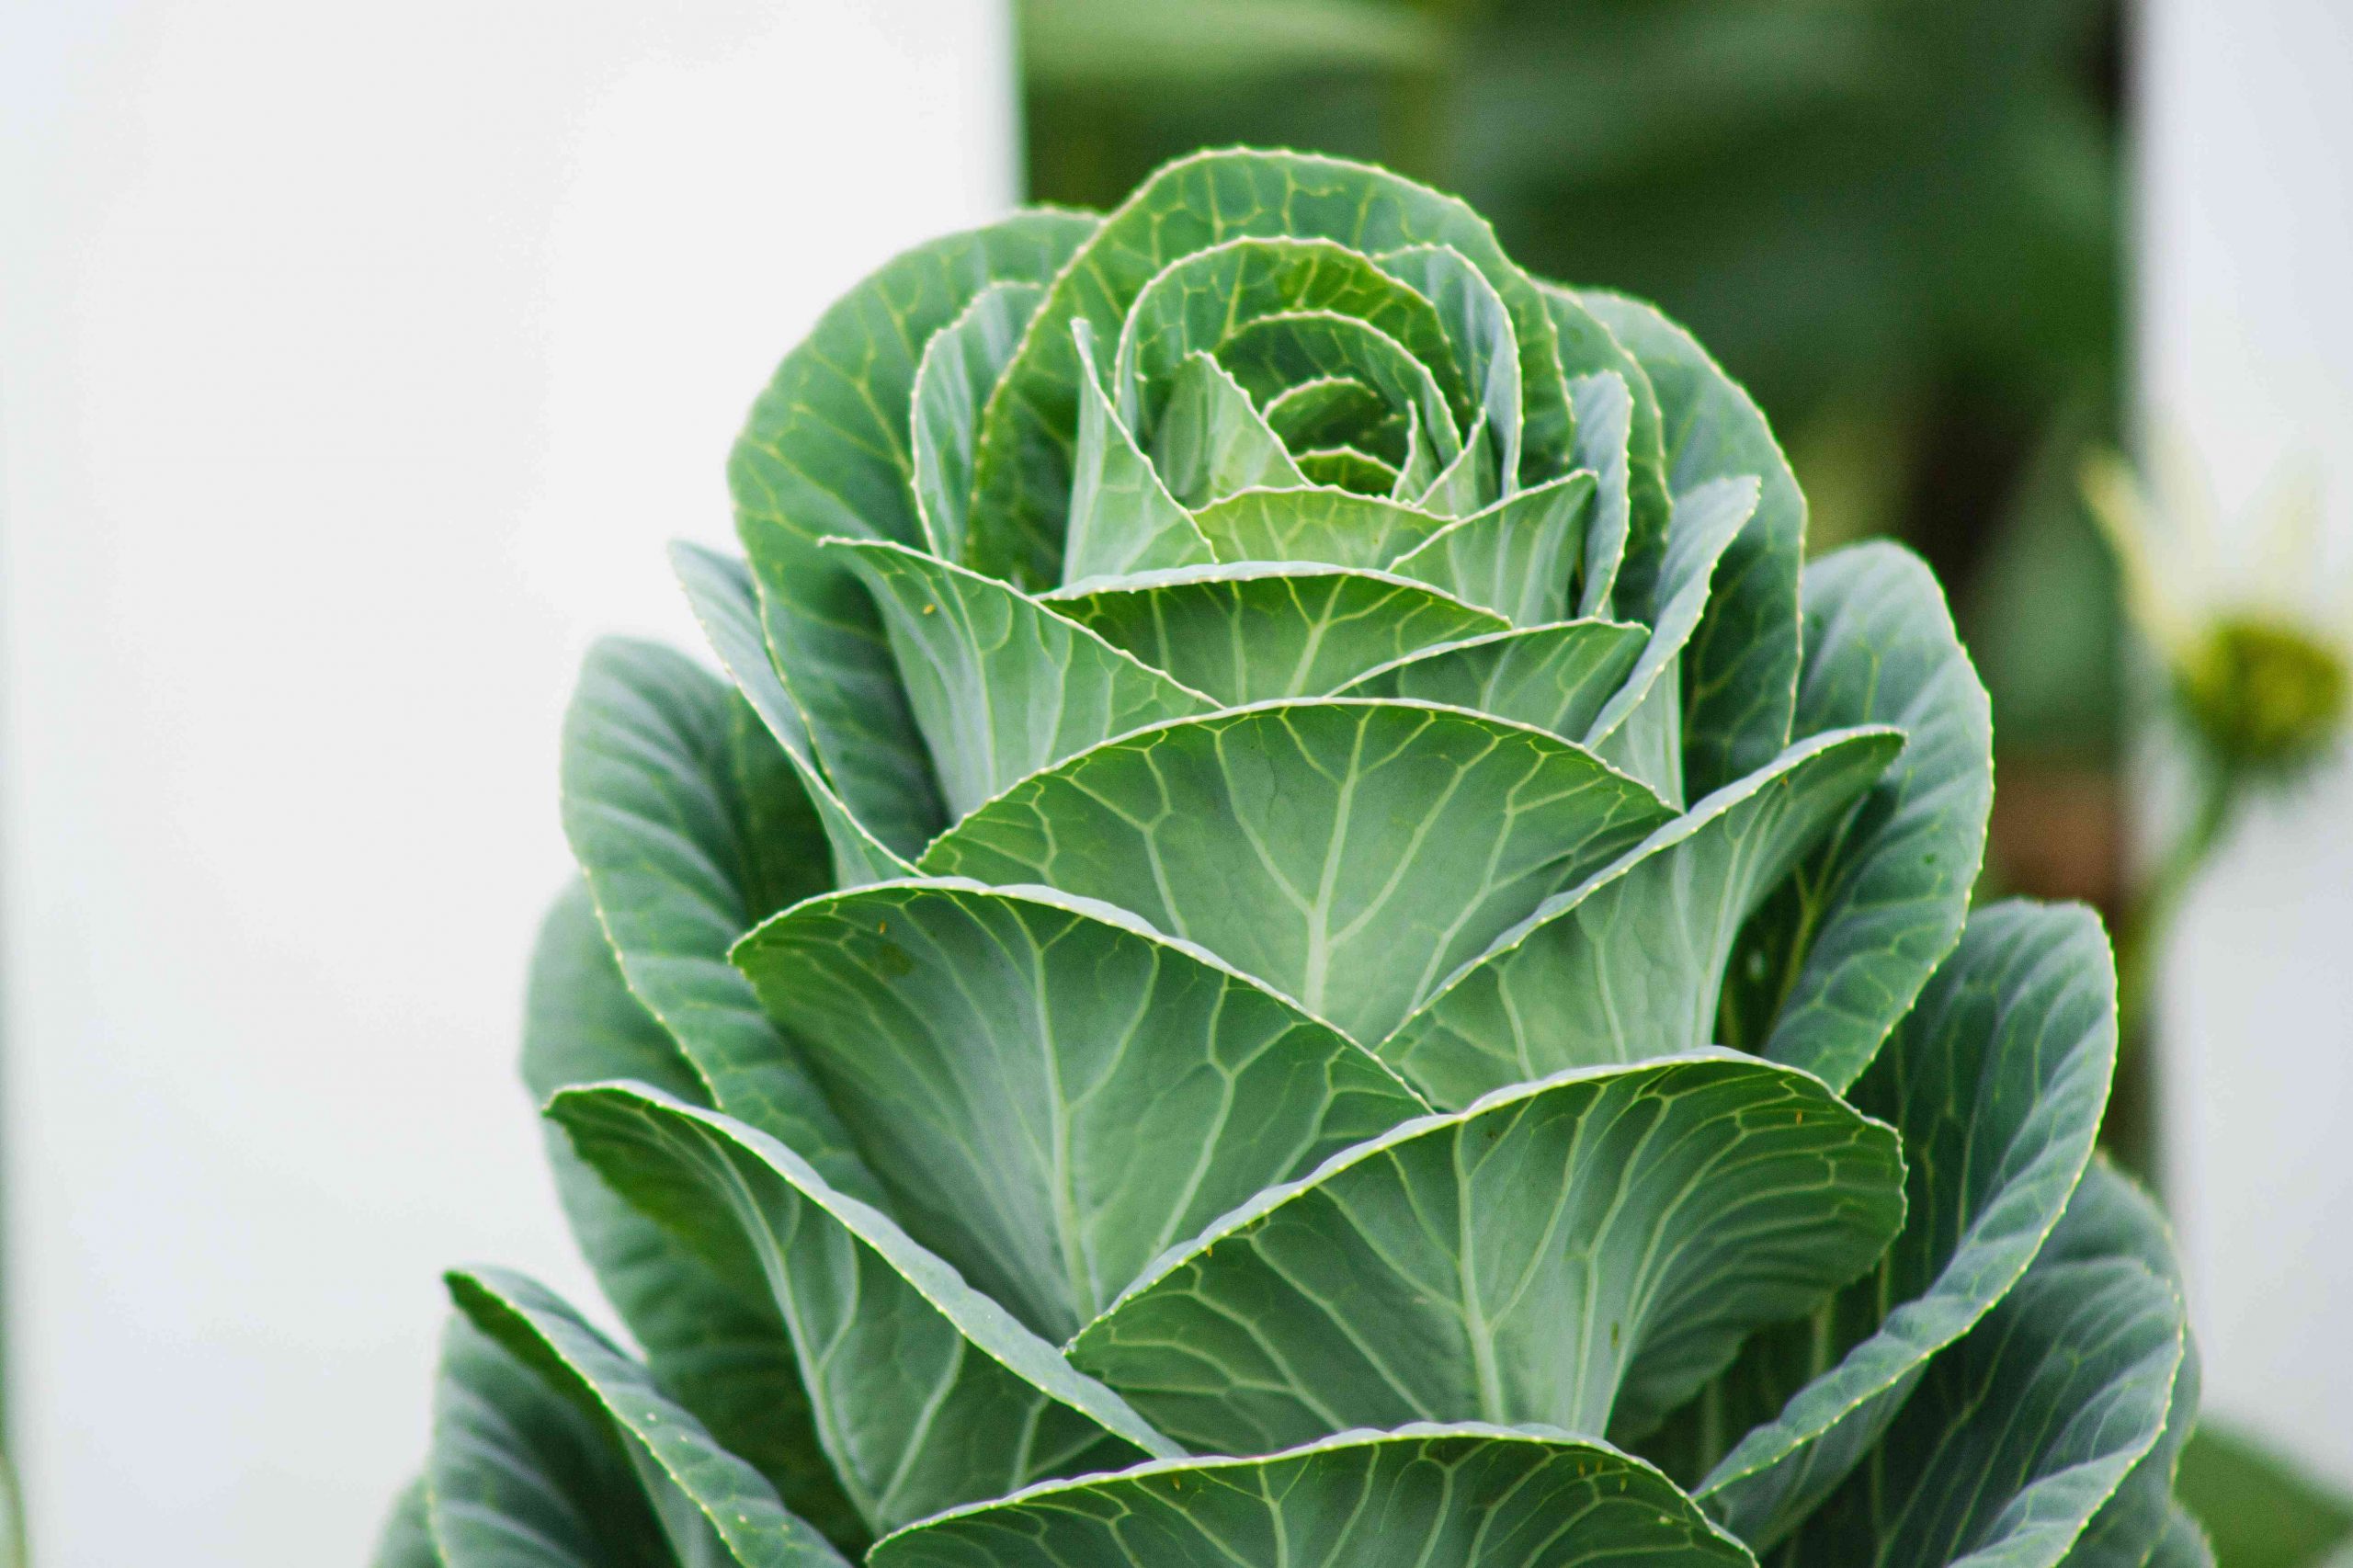 Container Gardening 101: A Guide to Growing Nutritious Collard Greens